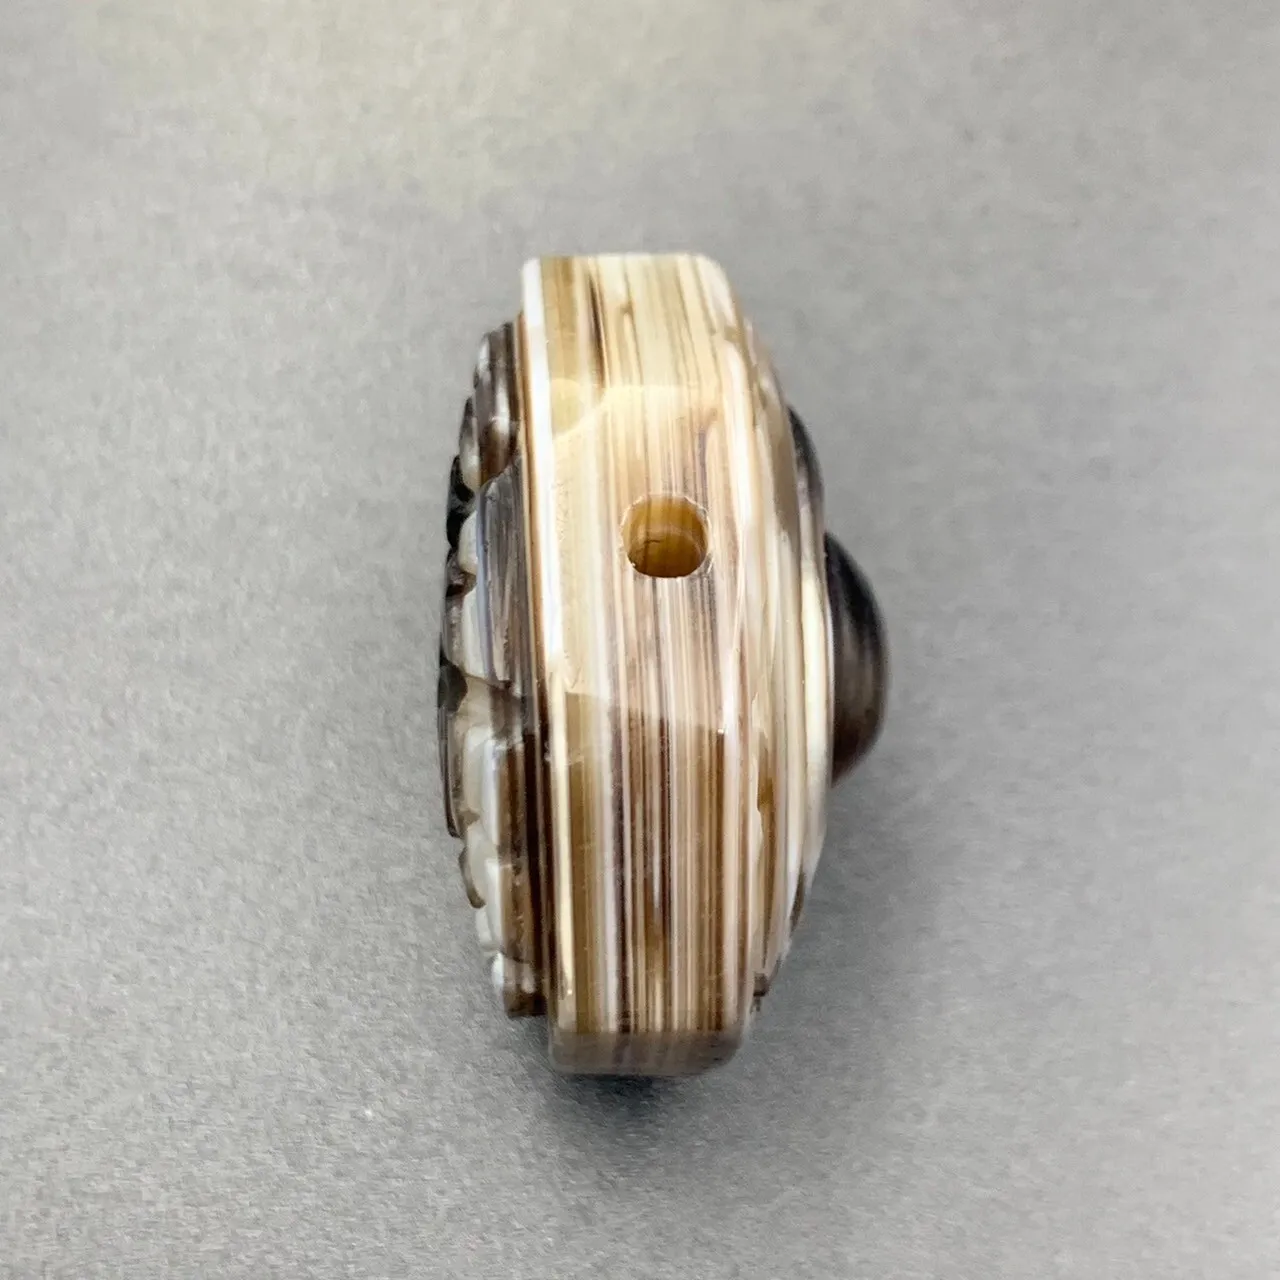 Awesome Himalayan Carved Agate Bead, Himalayan Asian Agate Bead, LBBR-49 - Image 4 of 6